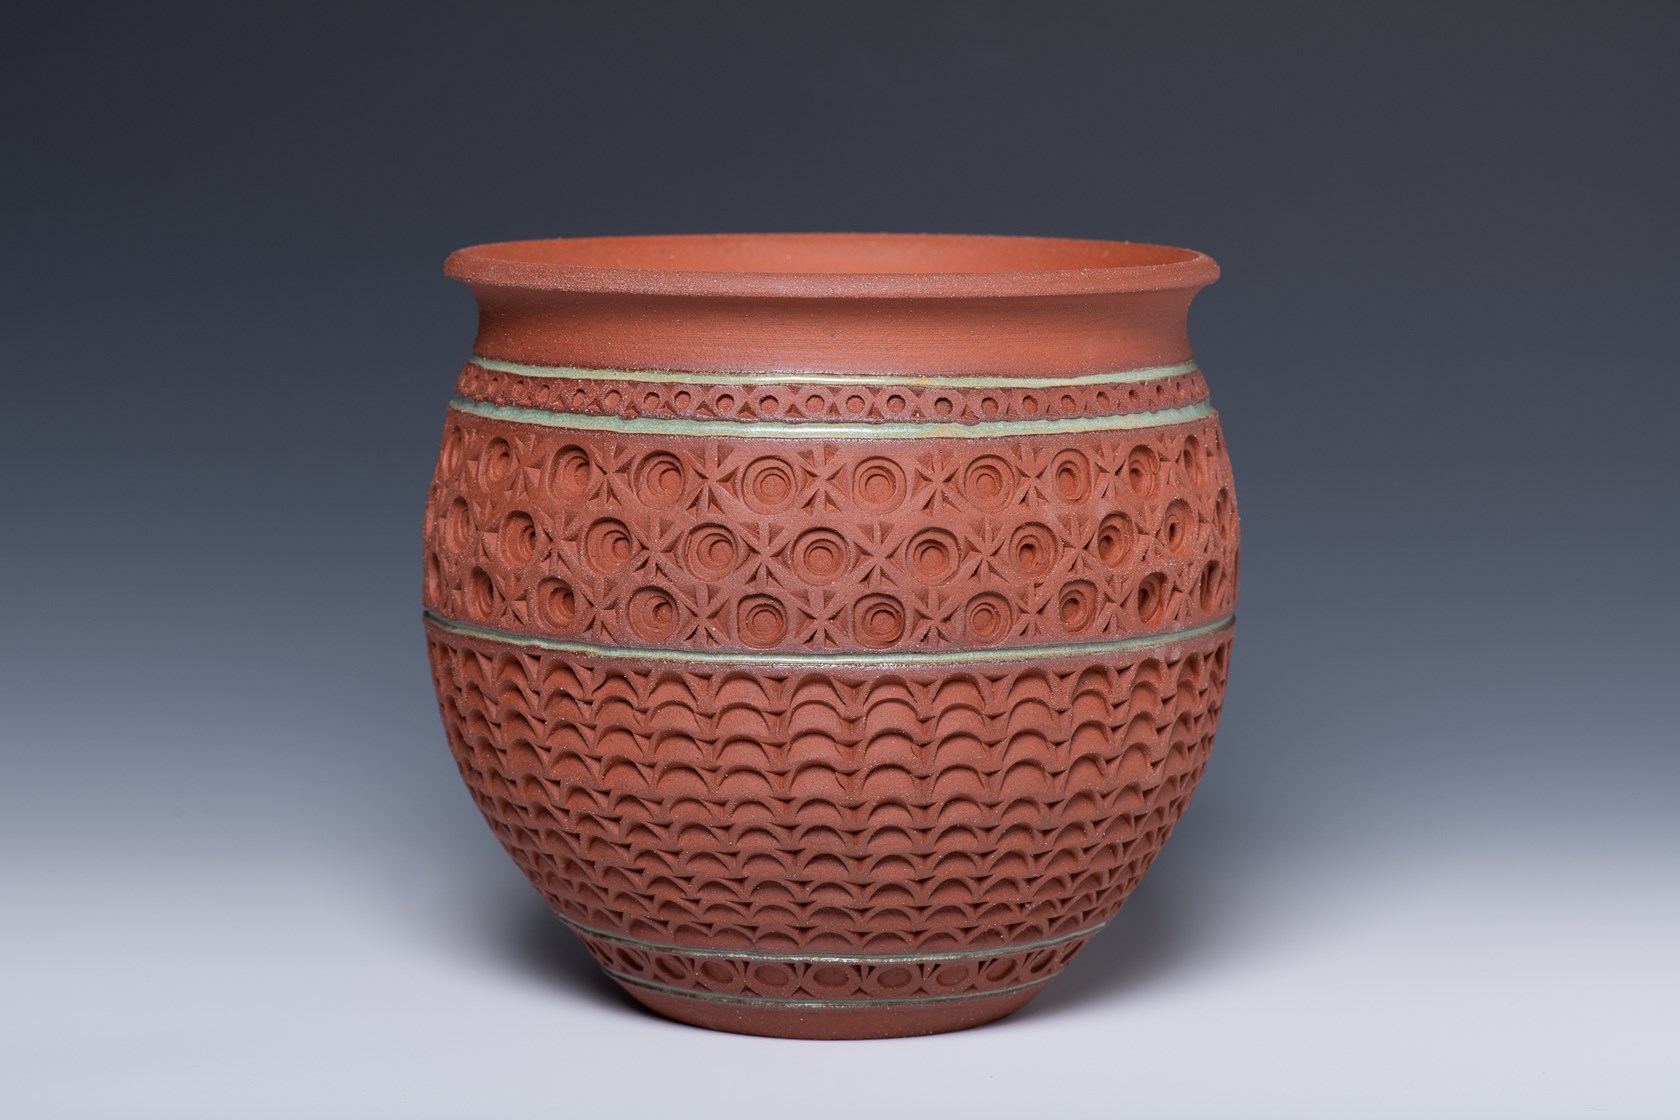 Mary Ellen Salmon, Textured planter 1, 9 in. (23 cm) in height, earthenware, 2020. www.salmonpottery.com